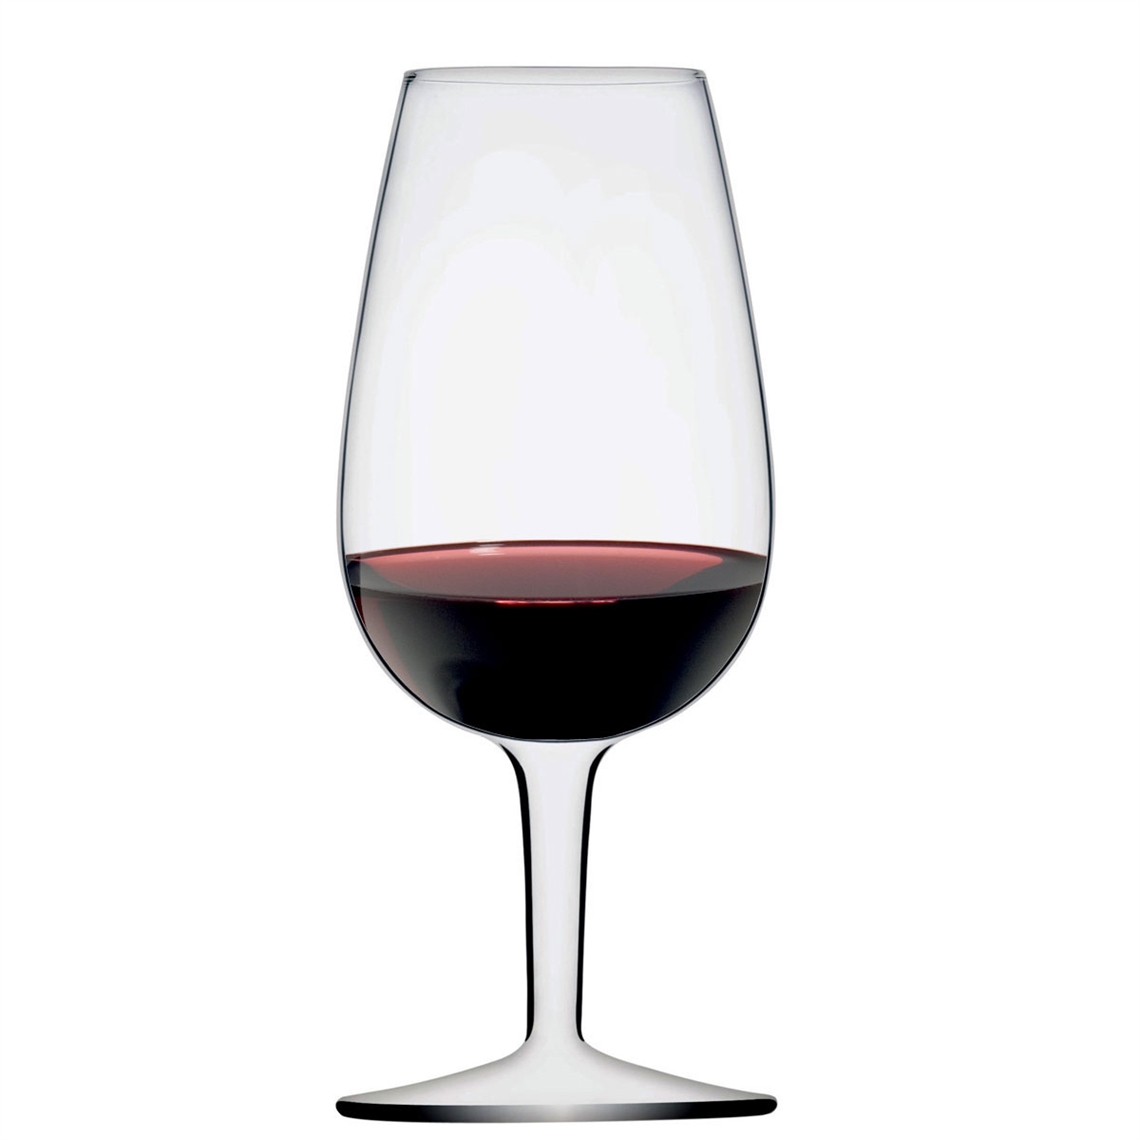 View more glassware from our Wine Tasting Glasses range